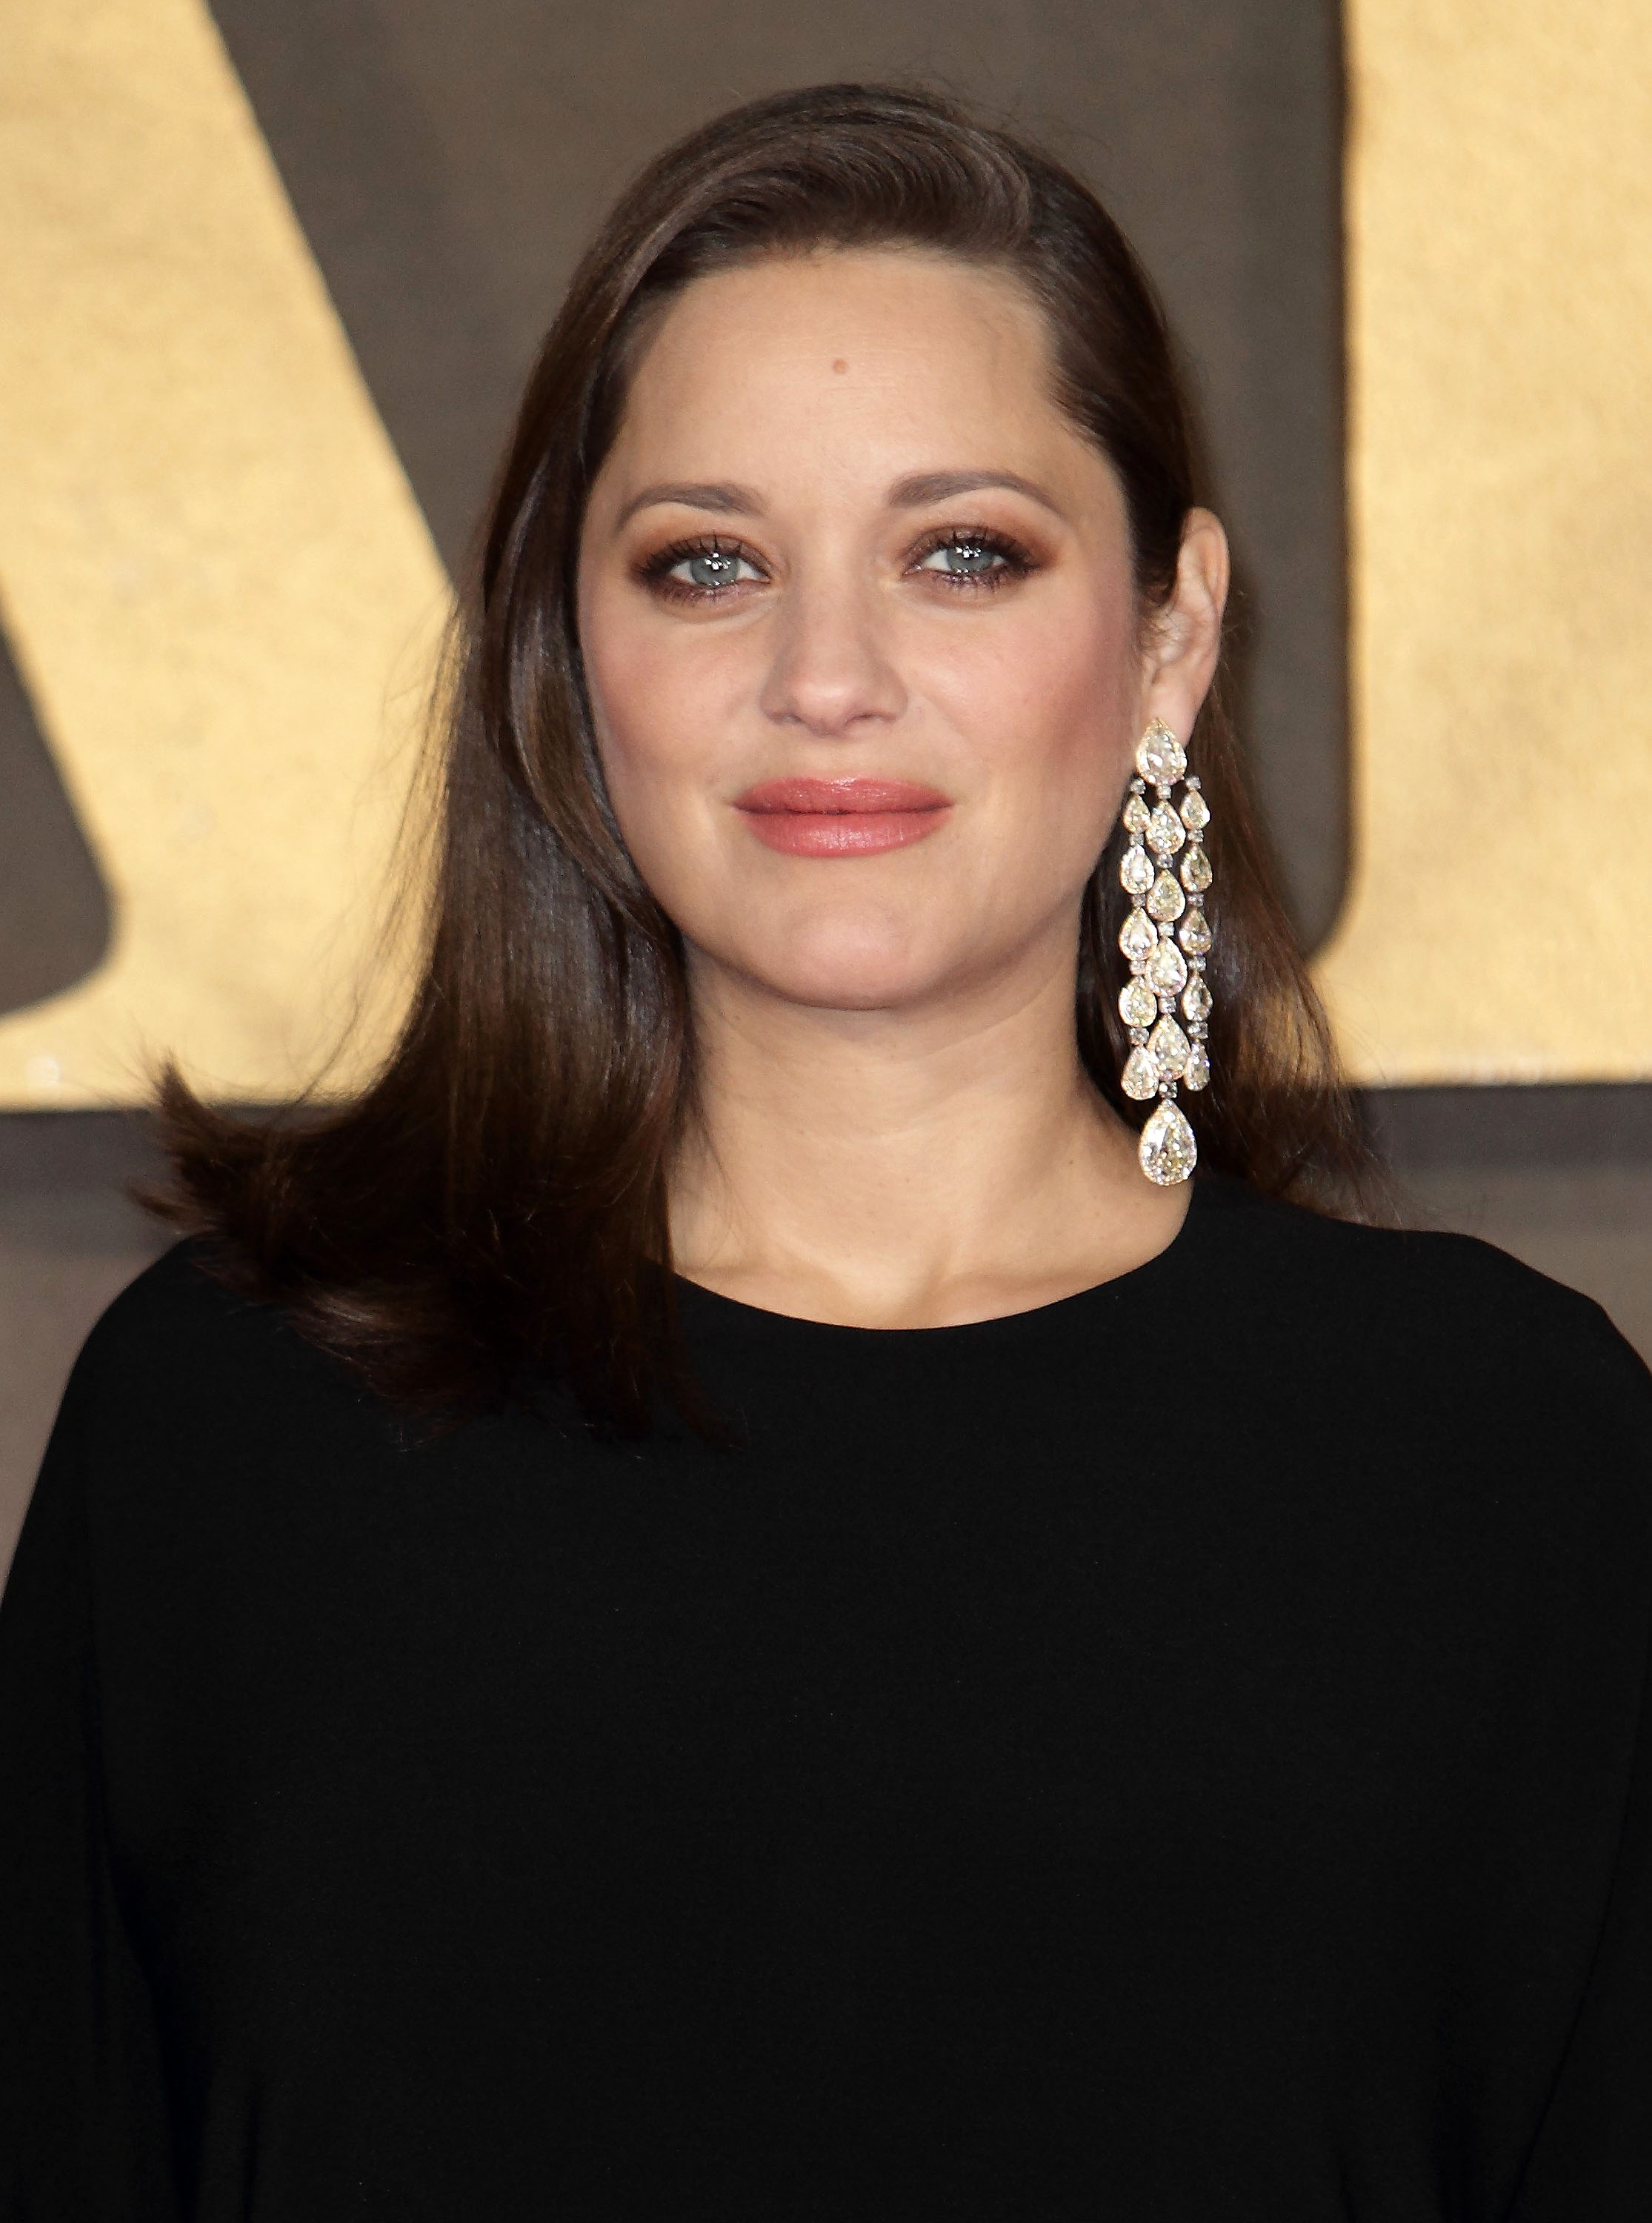 Checking In With Marion Cotillard’s Recent Maternity Wear